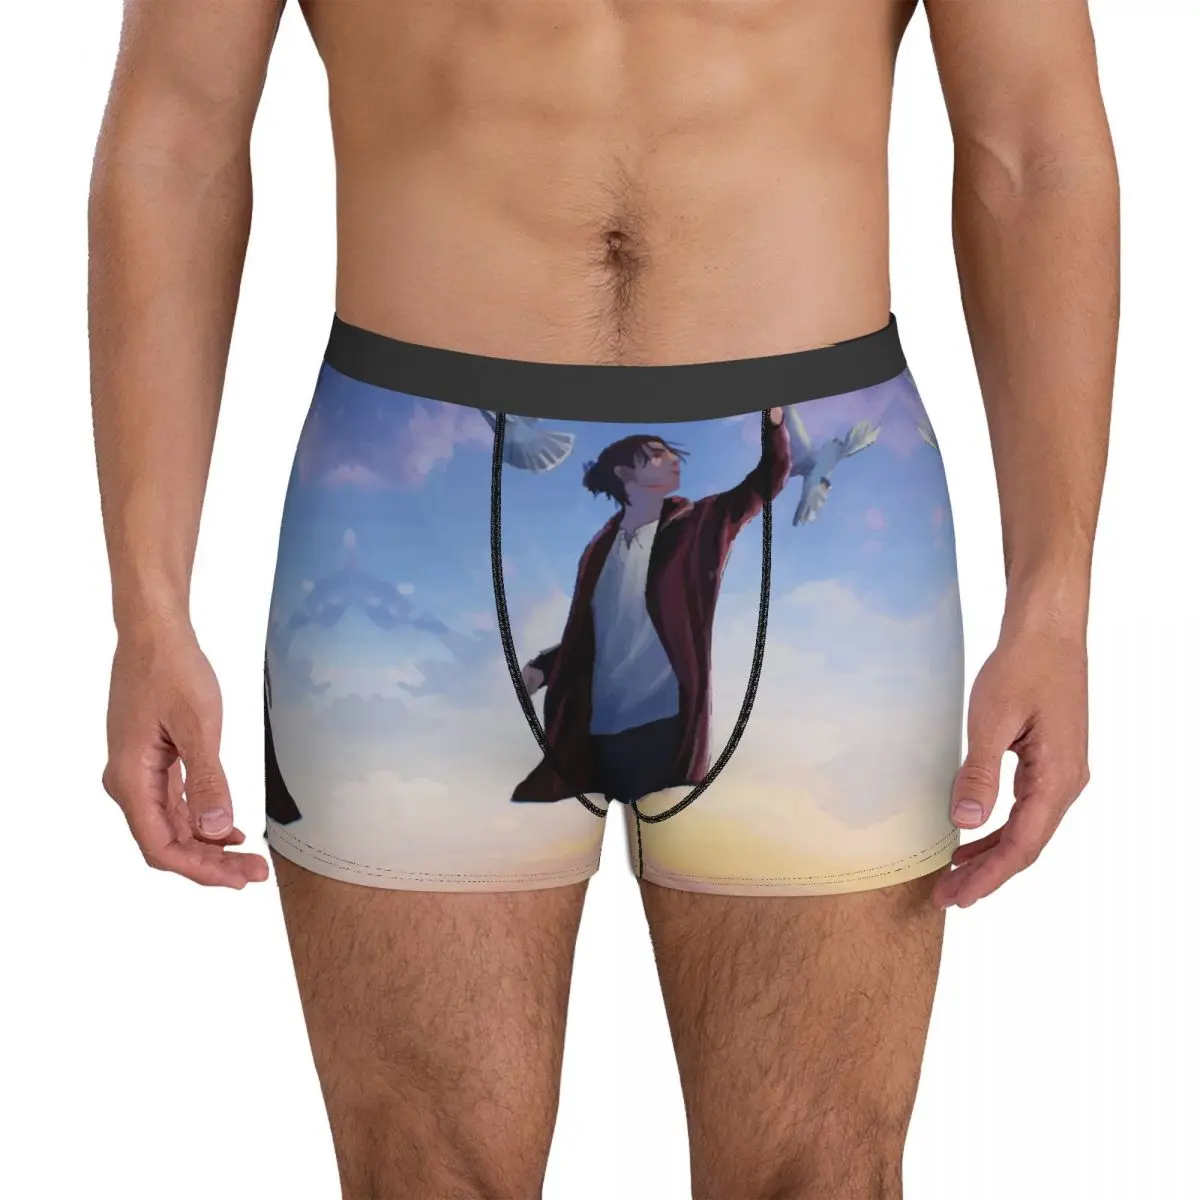 Eren Yeager The Boy Who Sought Freedom Underwear Attack On Titan Printed Trunk High Quality Men Panties Soft Shorts Briefs Gift